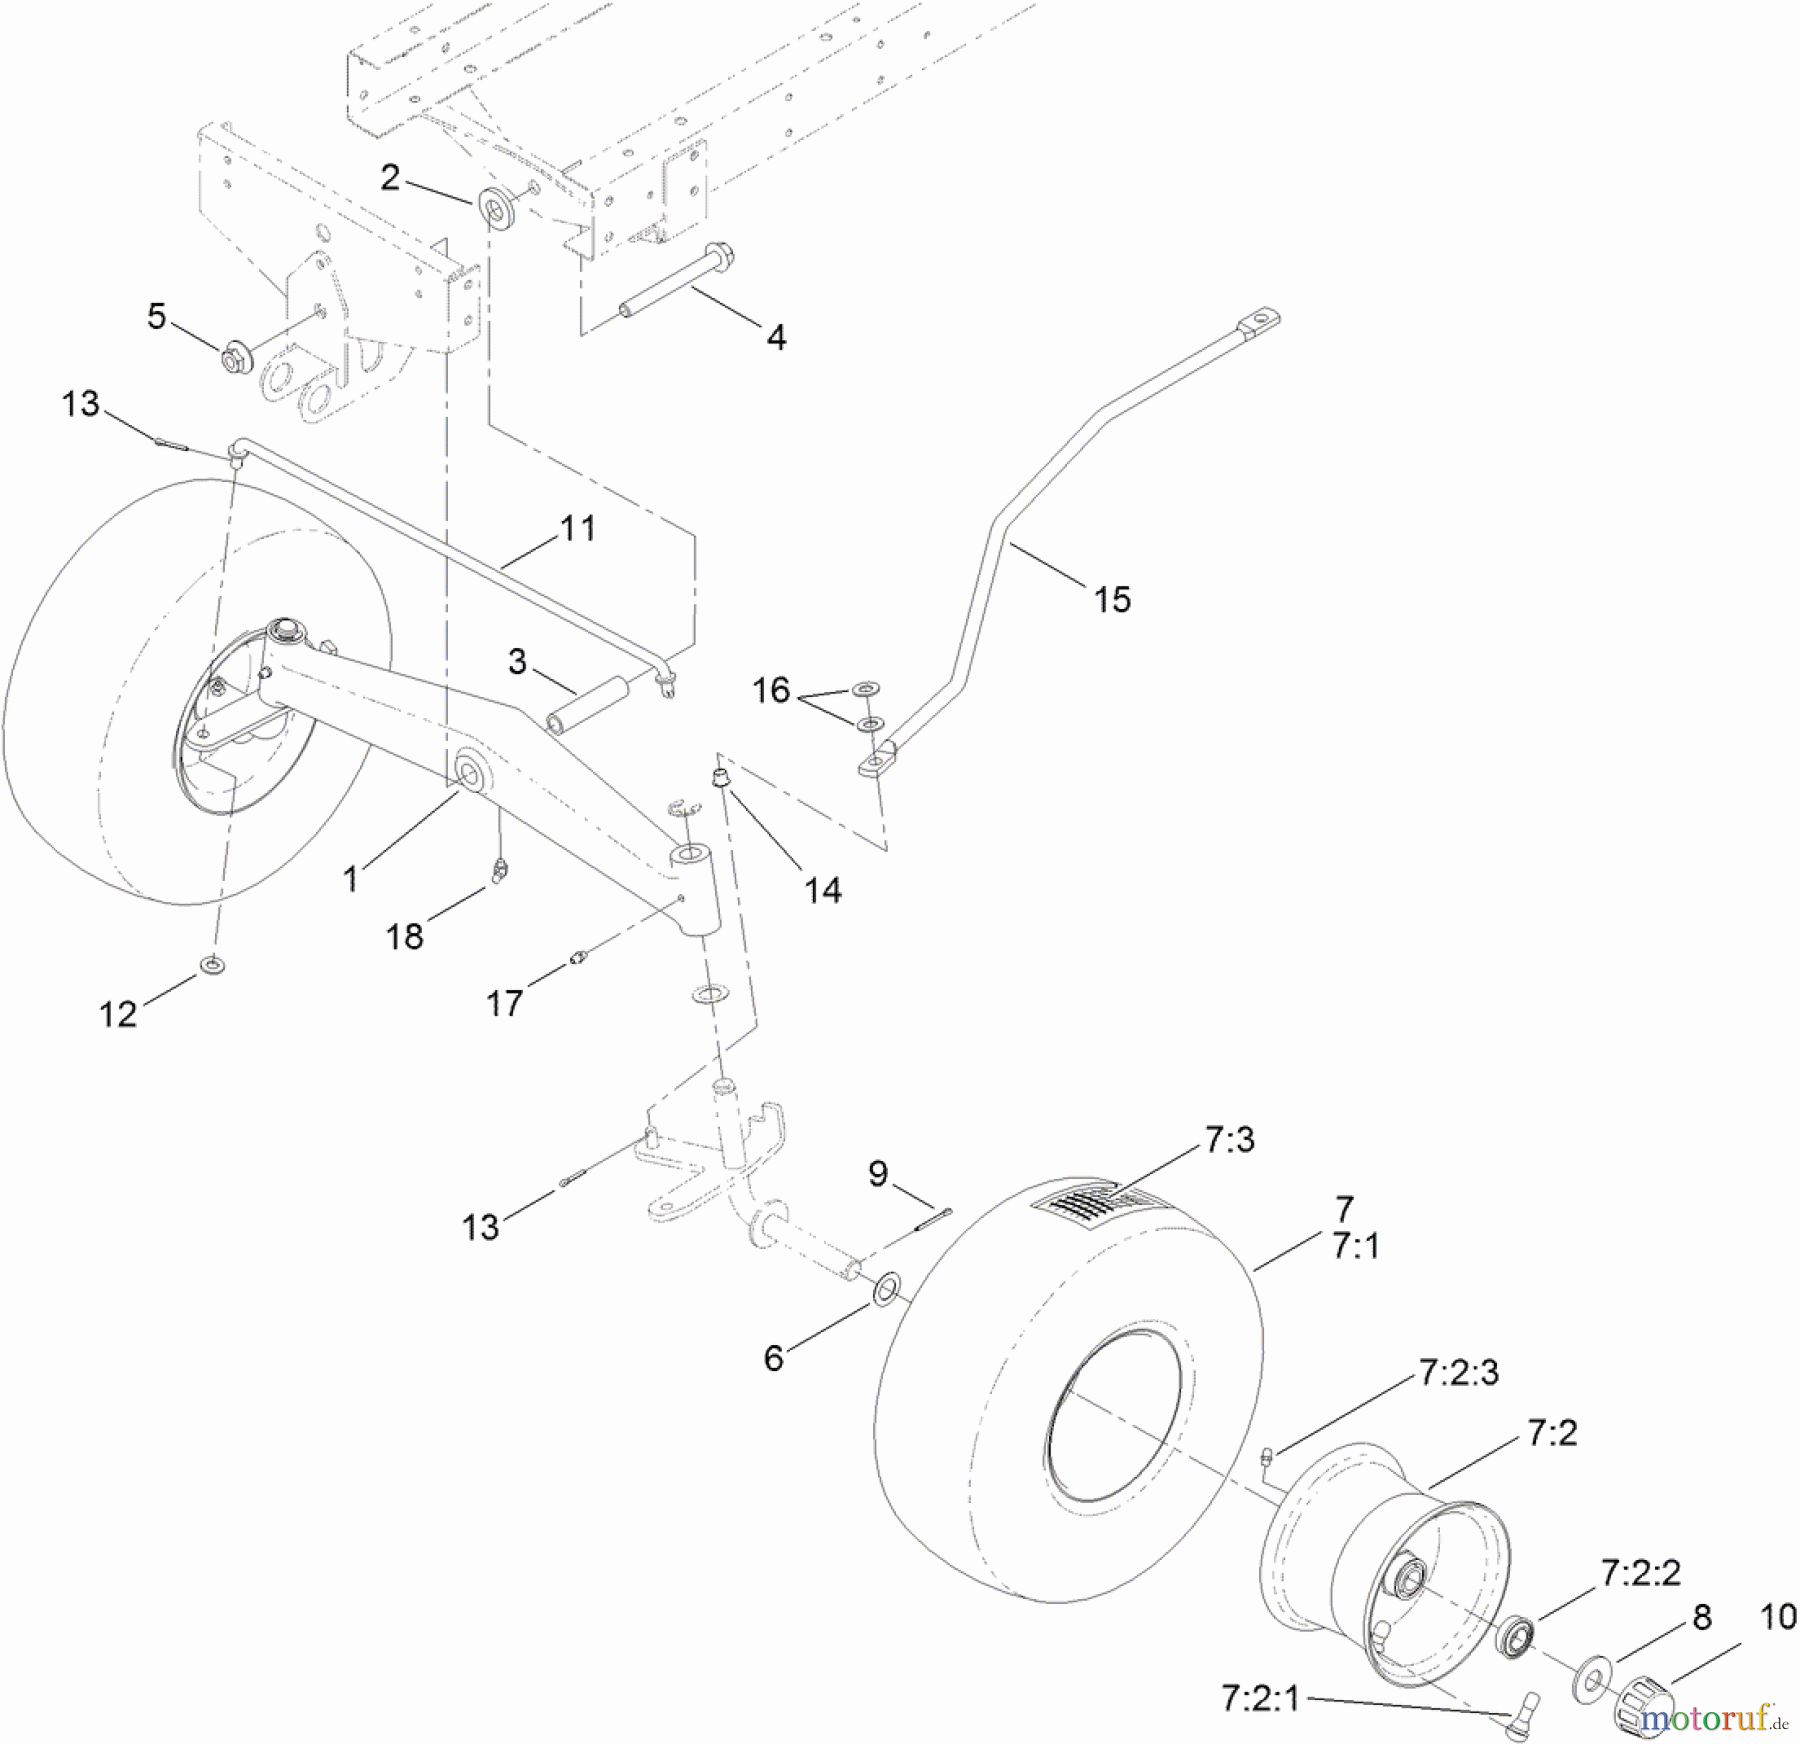  Toro Neu Mowers, Lawn & Garden Tractor Seite 1 71254 (XLS 380) - Toro XLS 380 Lawn Tractor, 2011 (311000001-311999999) FRONT WHEEL AND AXLE ASSEMBLY